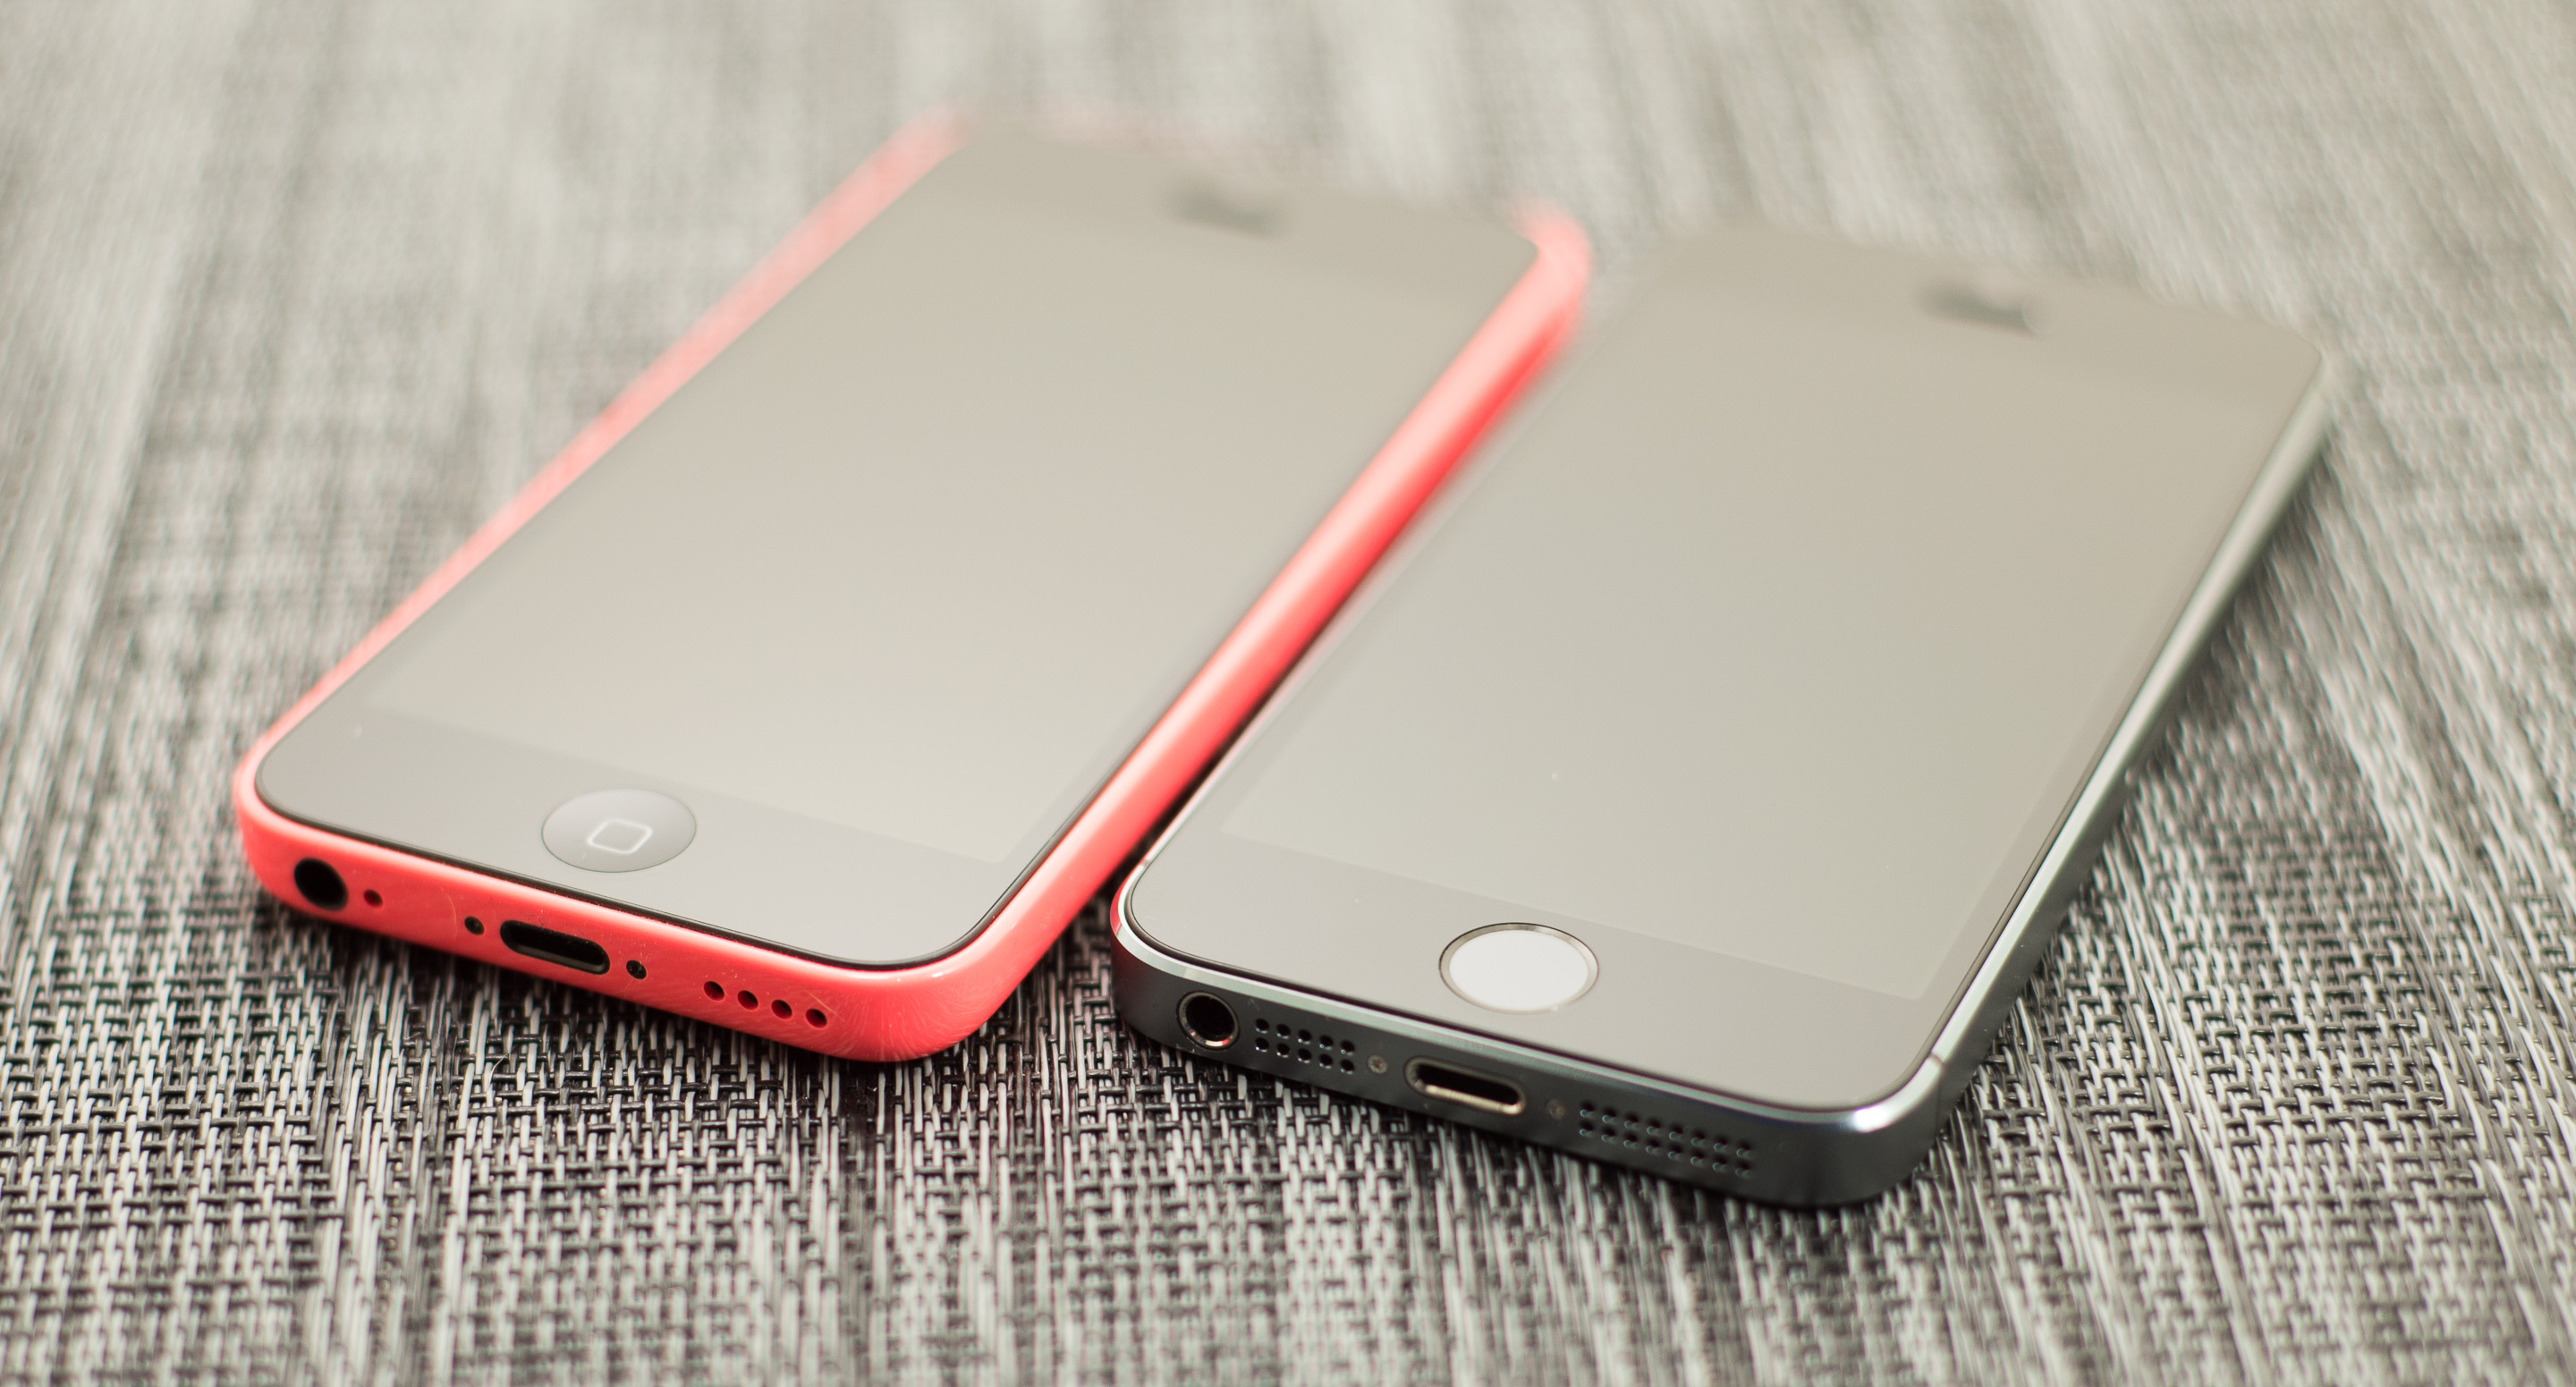 The iPhone 5c Review